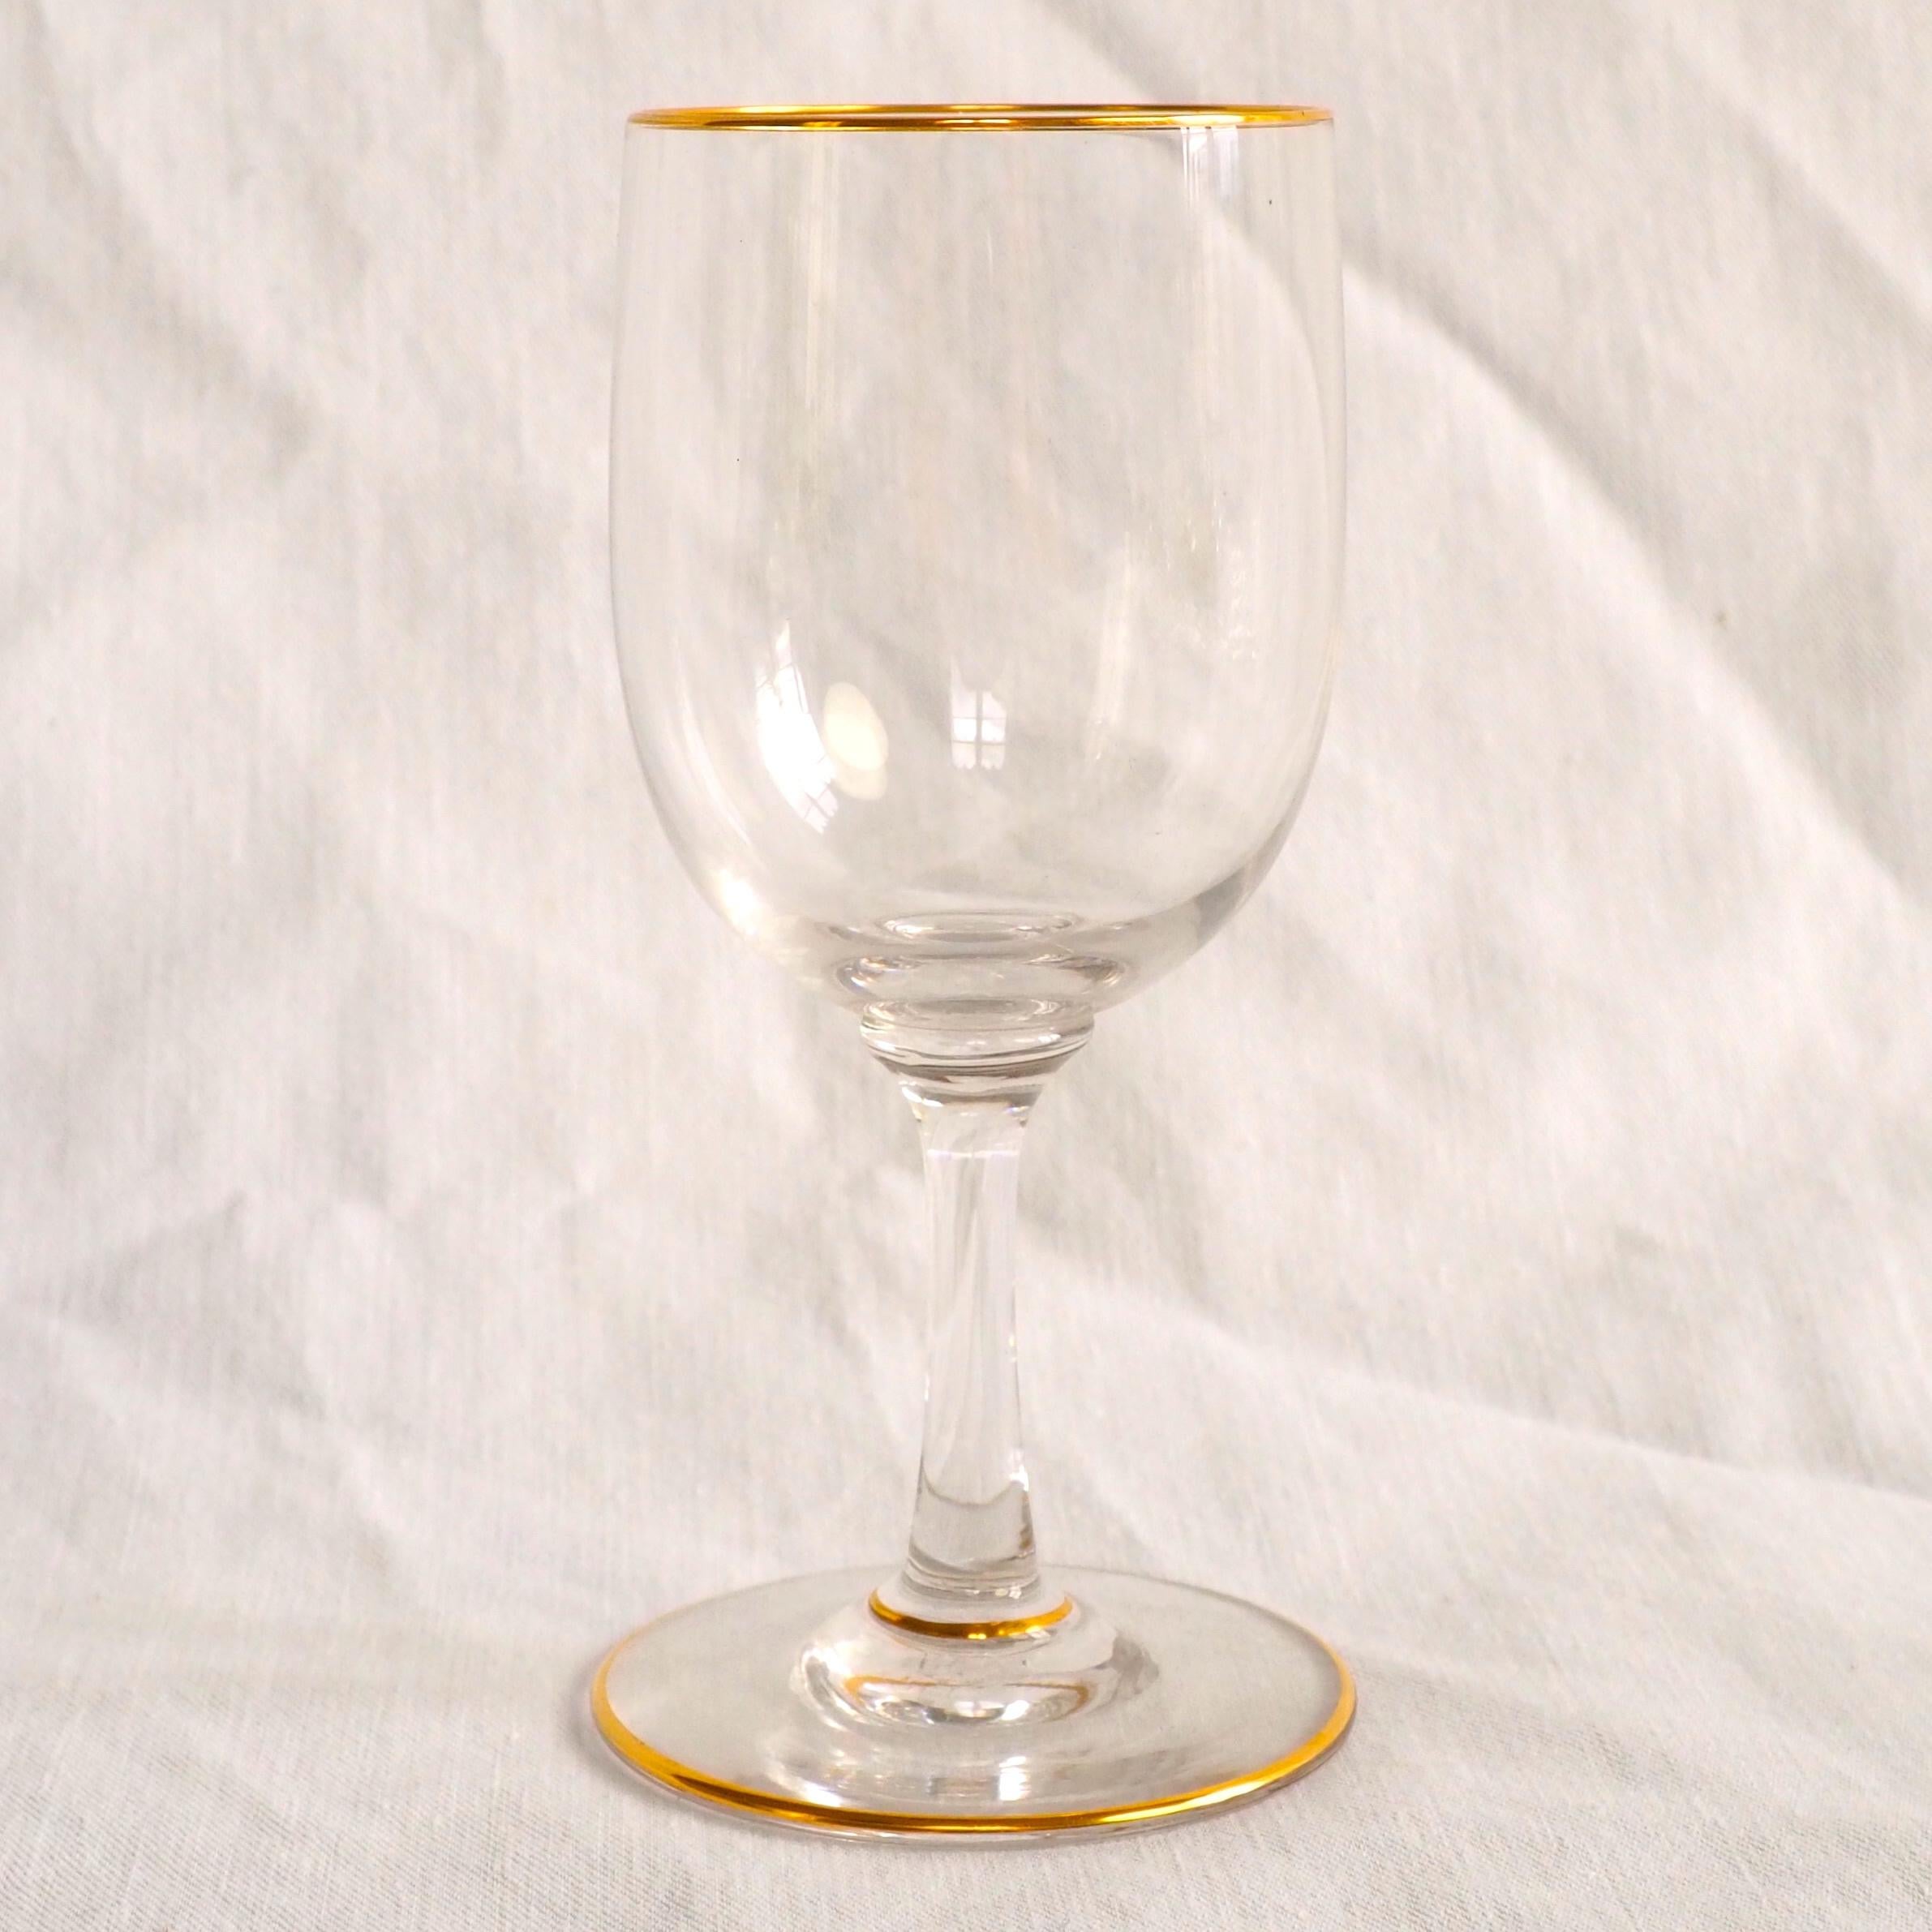 20th Century Set of 3 Baccarat crystal glasses - France - Perfection model enhanced with gold